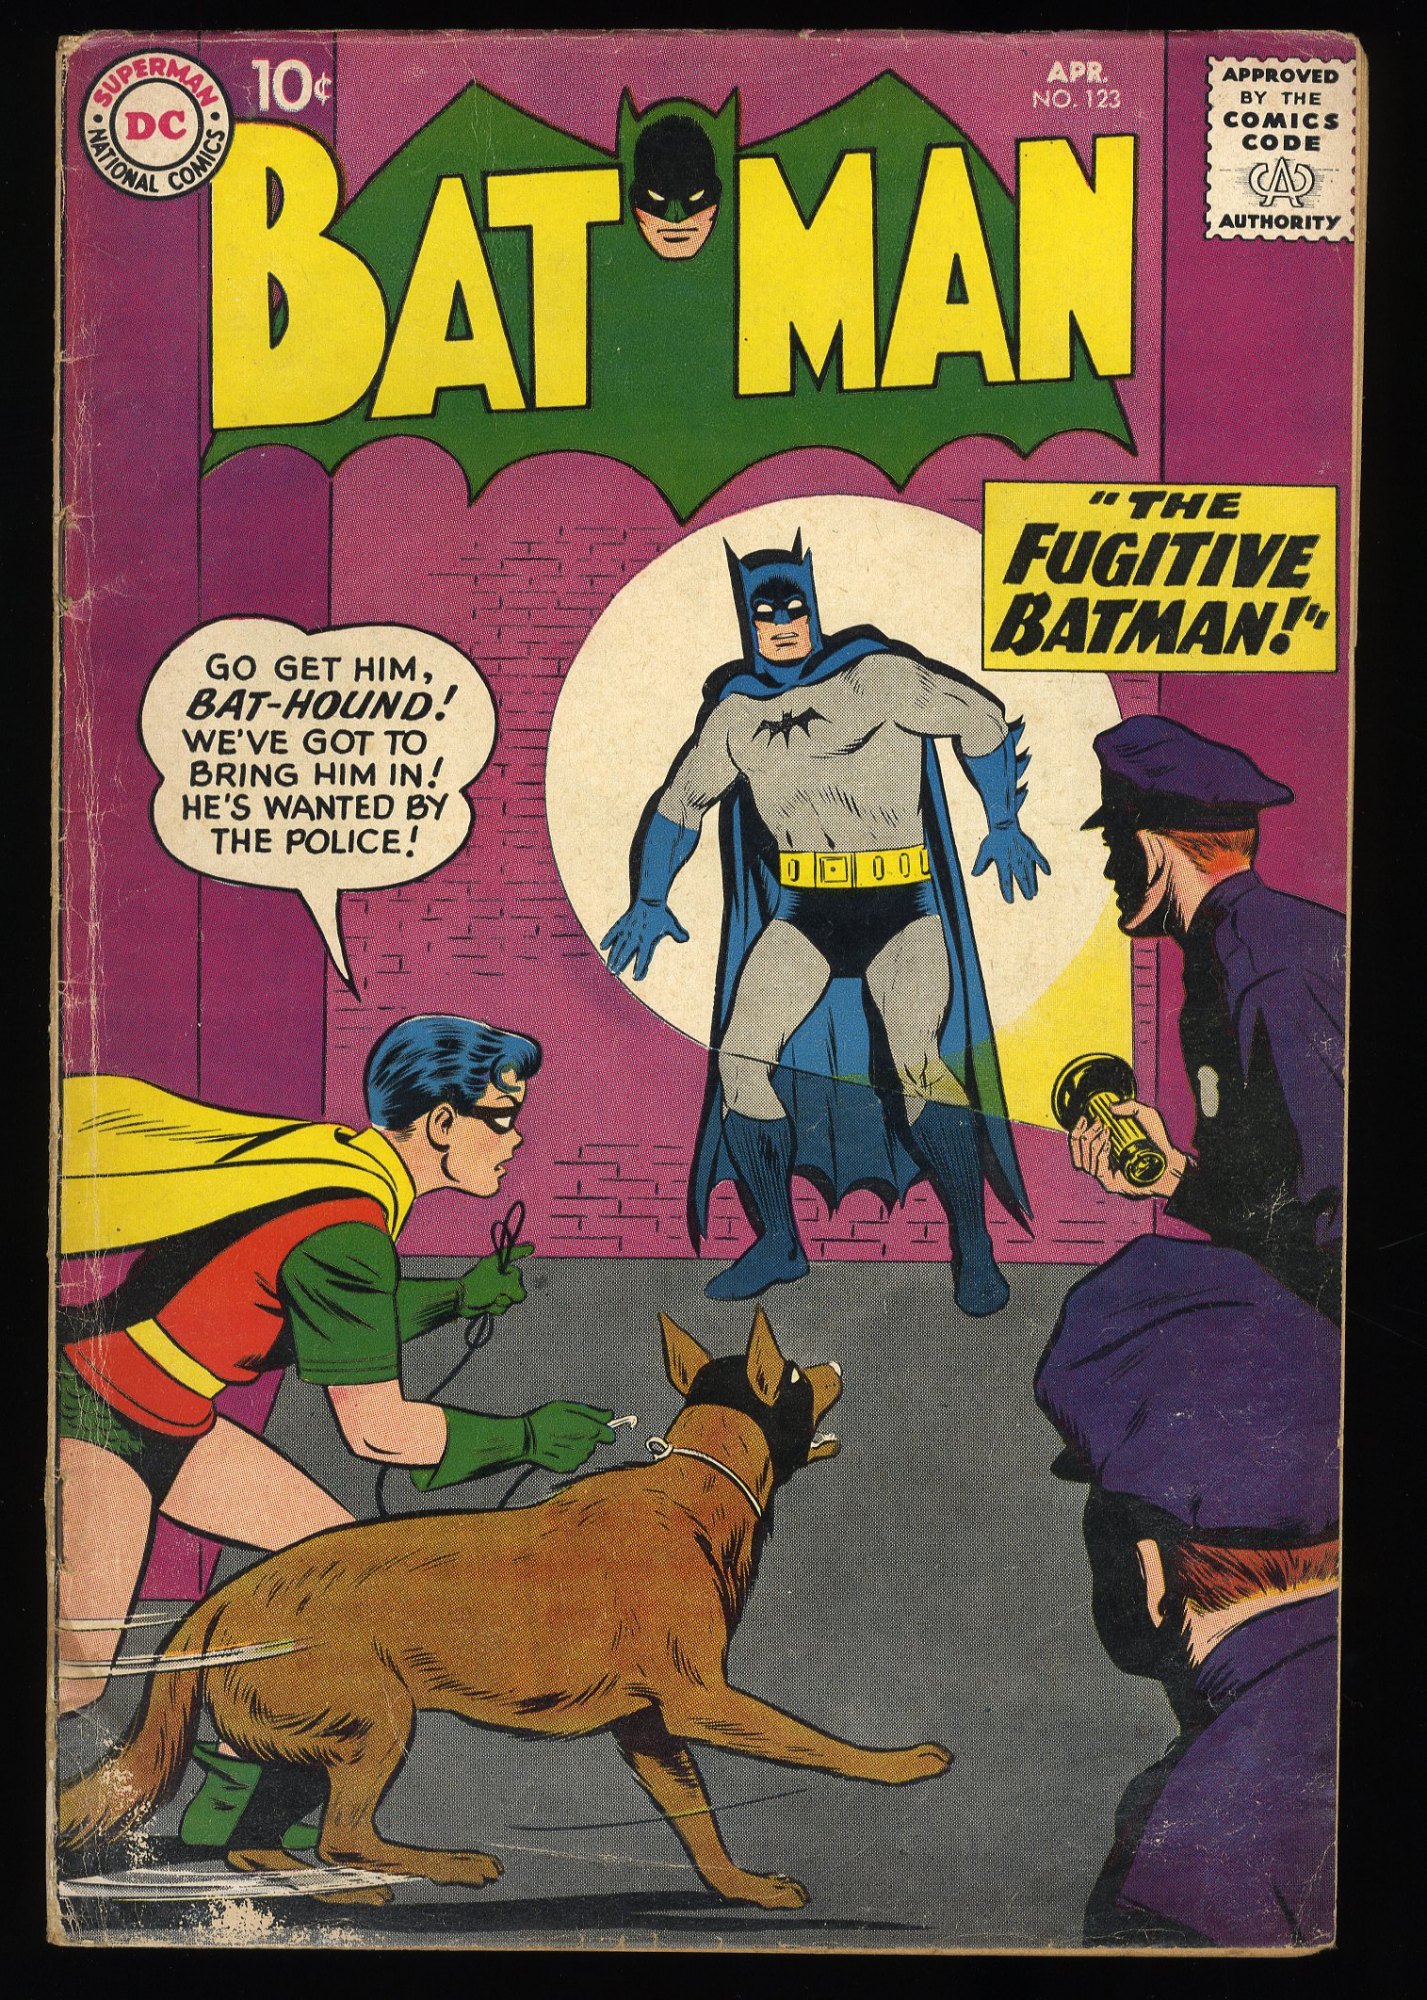 Image: Batman #123 VG 4.0 Bat-Hound! Ad for Brave and the Bold #23!